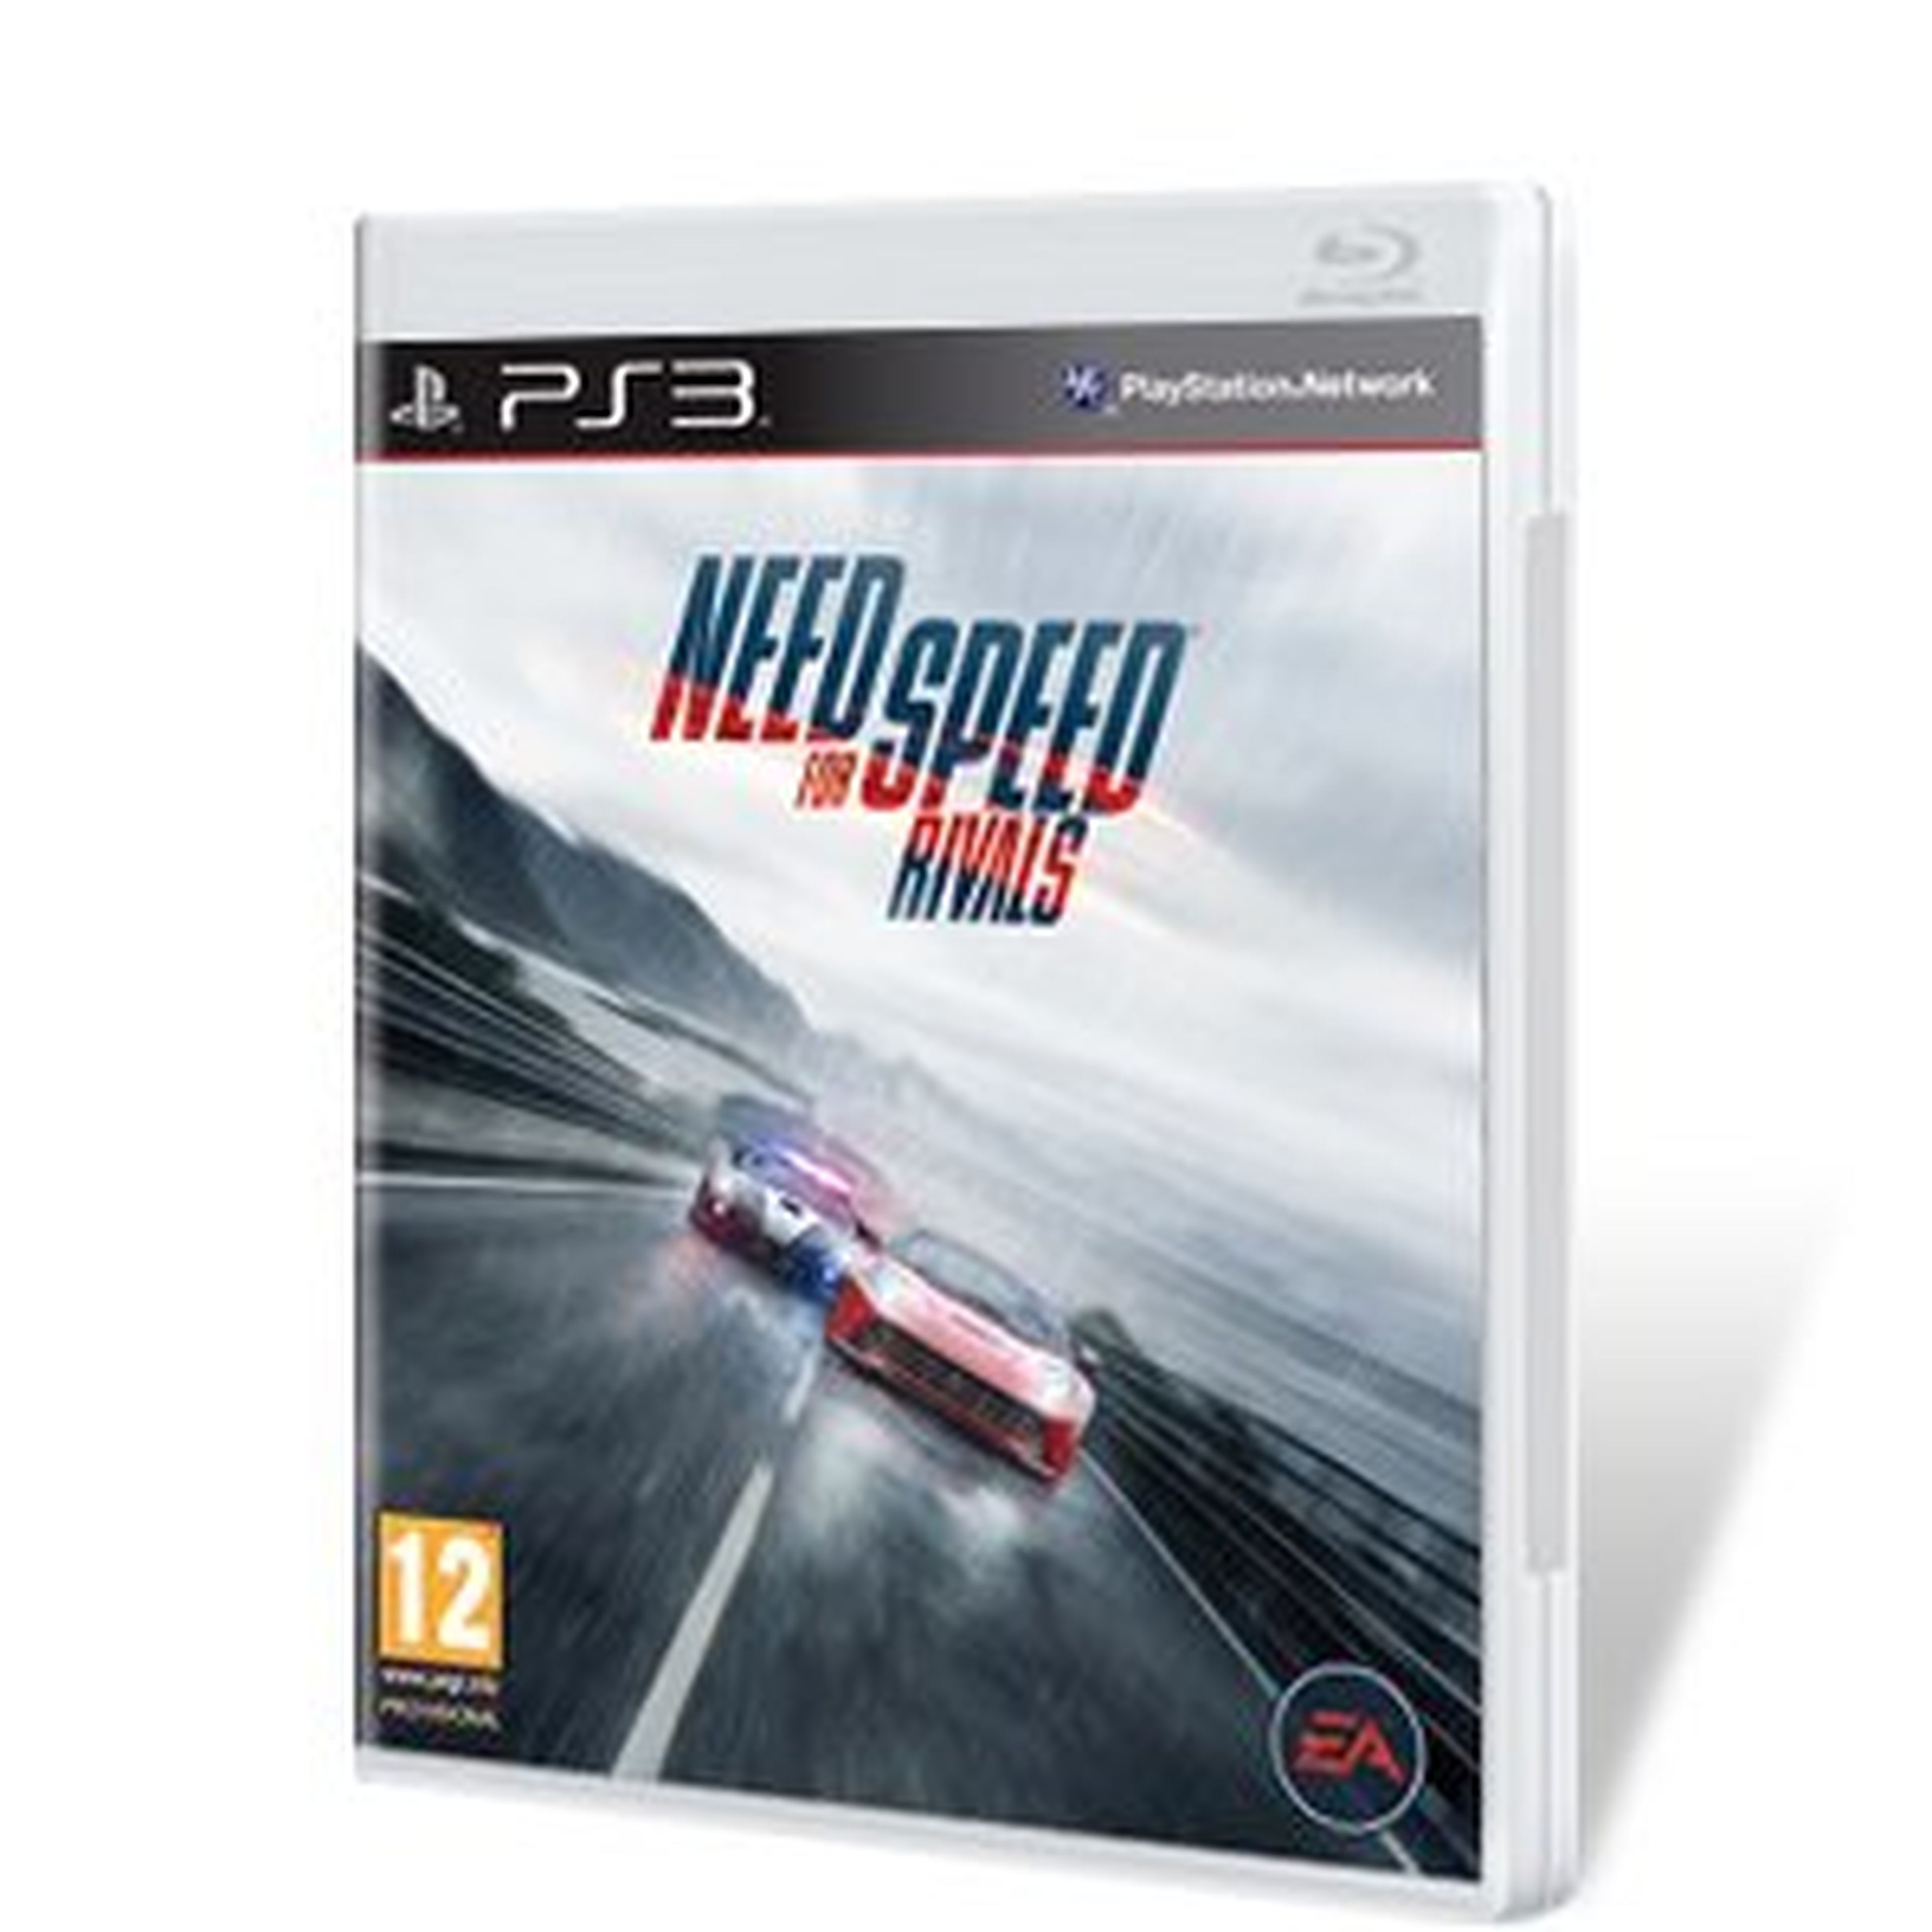 Need for Speed Rivals para PS3